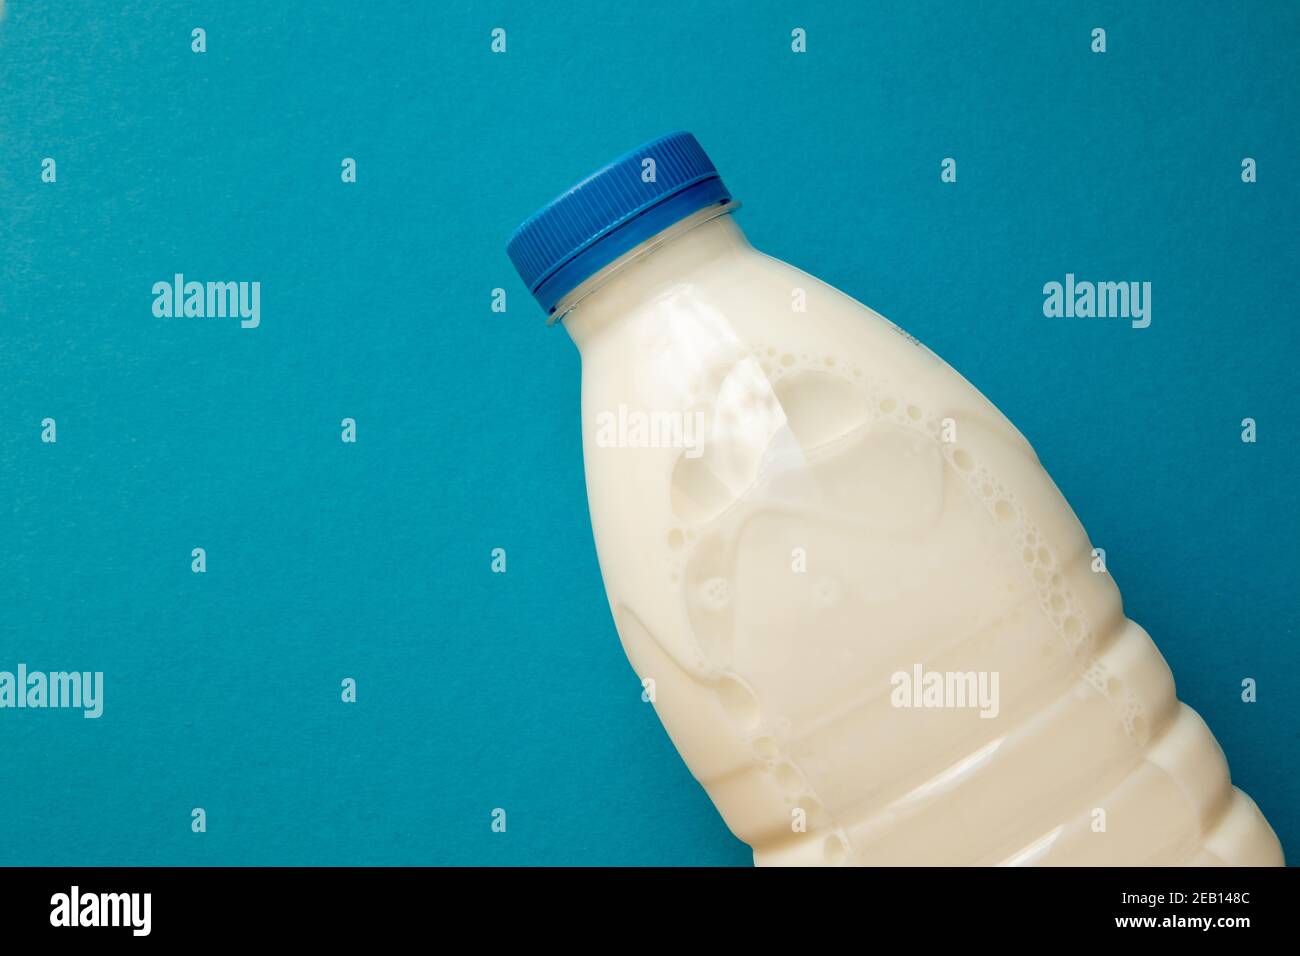 Fresh dairy product in full plastic bottle for milk, kefir or yoghurt with blue cap in center of blue background. Top view. Stock Photo